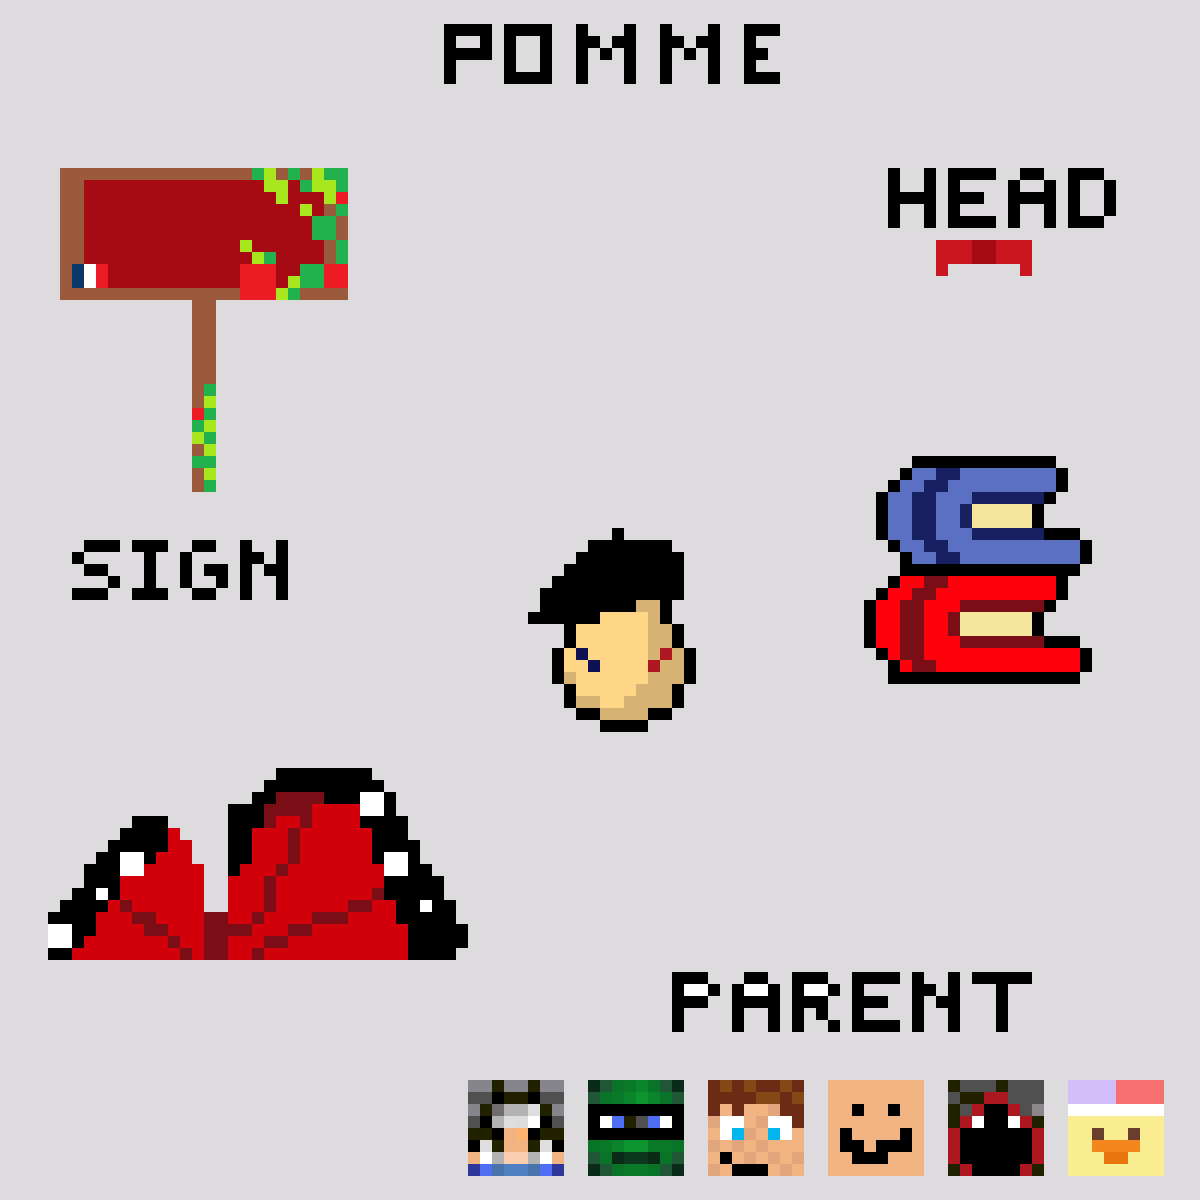 I didn't thinks I would post this but I want to post all my silly little pixel art I did for all the eggs.
#pommefanart #dapperfanart #richarlysonfanart #ramonfanart #sunnyfanart #empanadafanart #pepitofanart #chunsikfanart